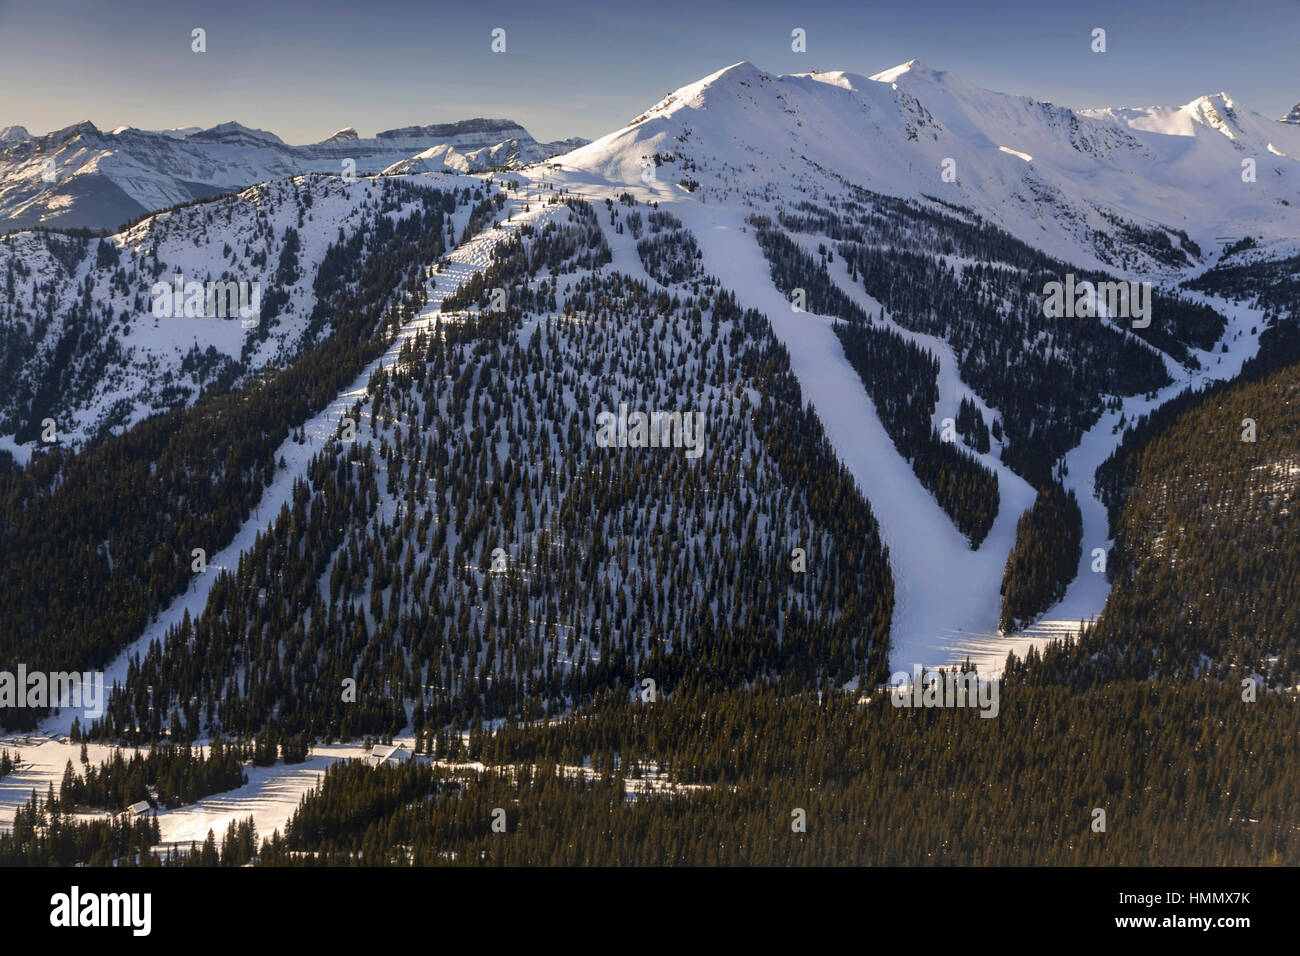 Lake Louise Winter Ski Area Snow Covered Groomed Slopes Aerial View Banff National Park Rocky Mountains Alberta Canada Stock Photo